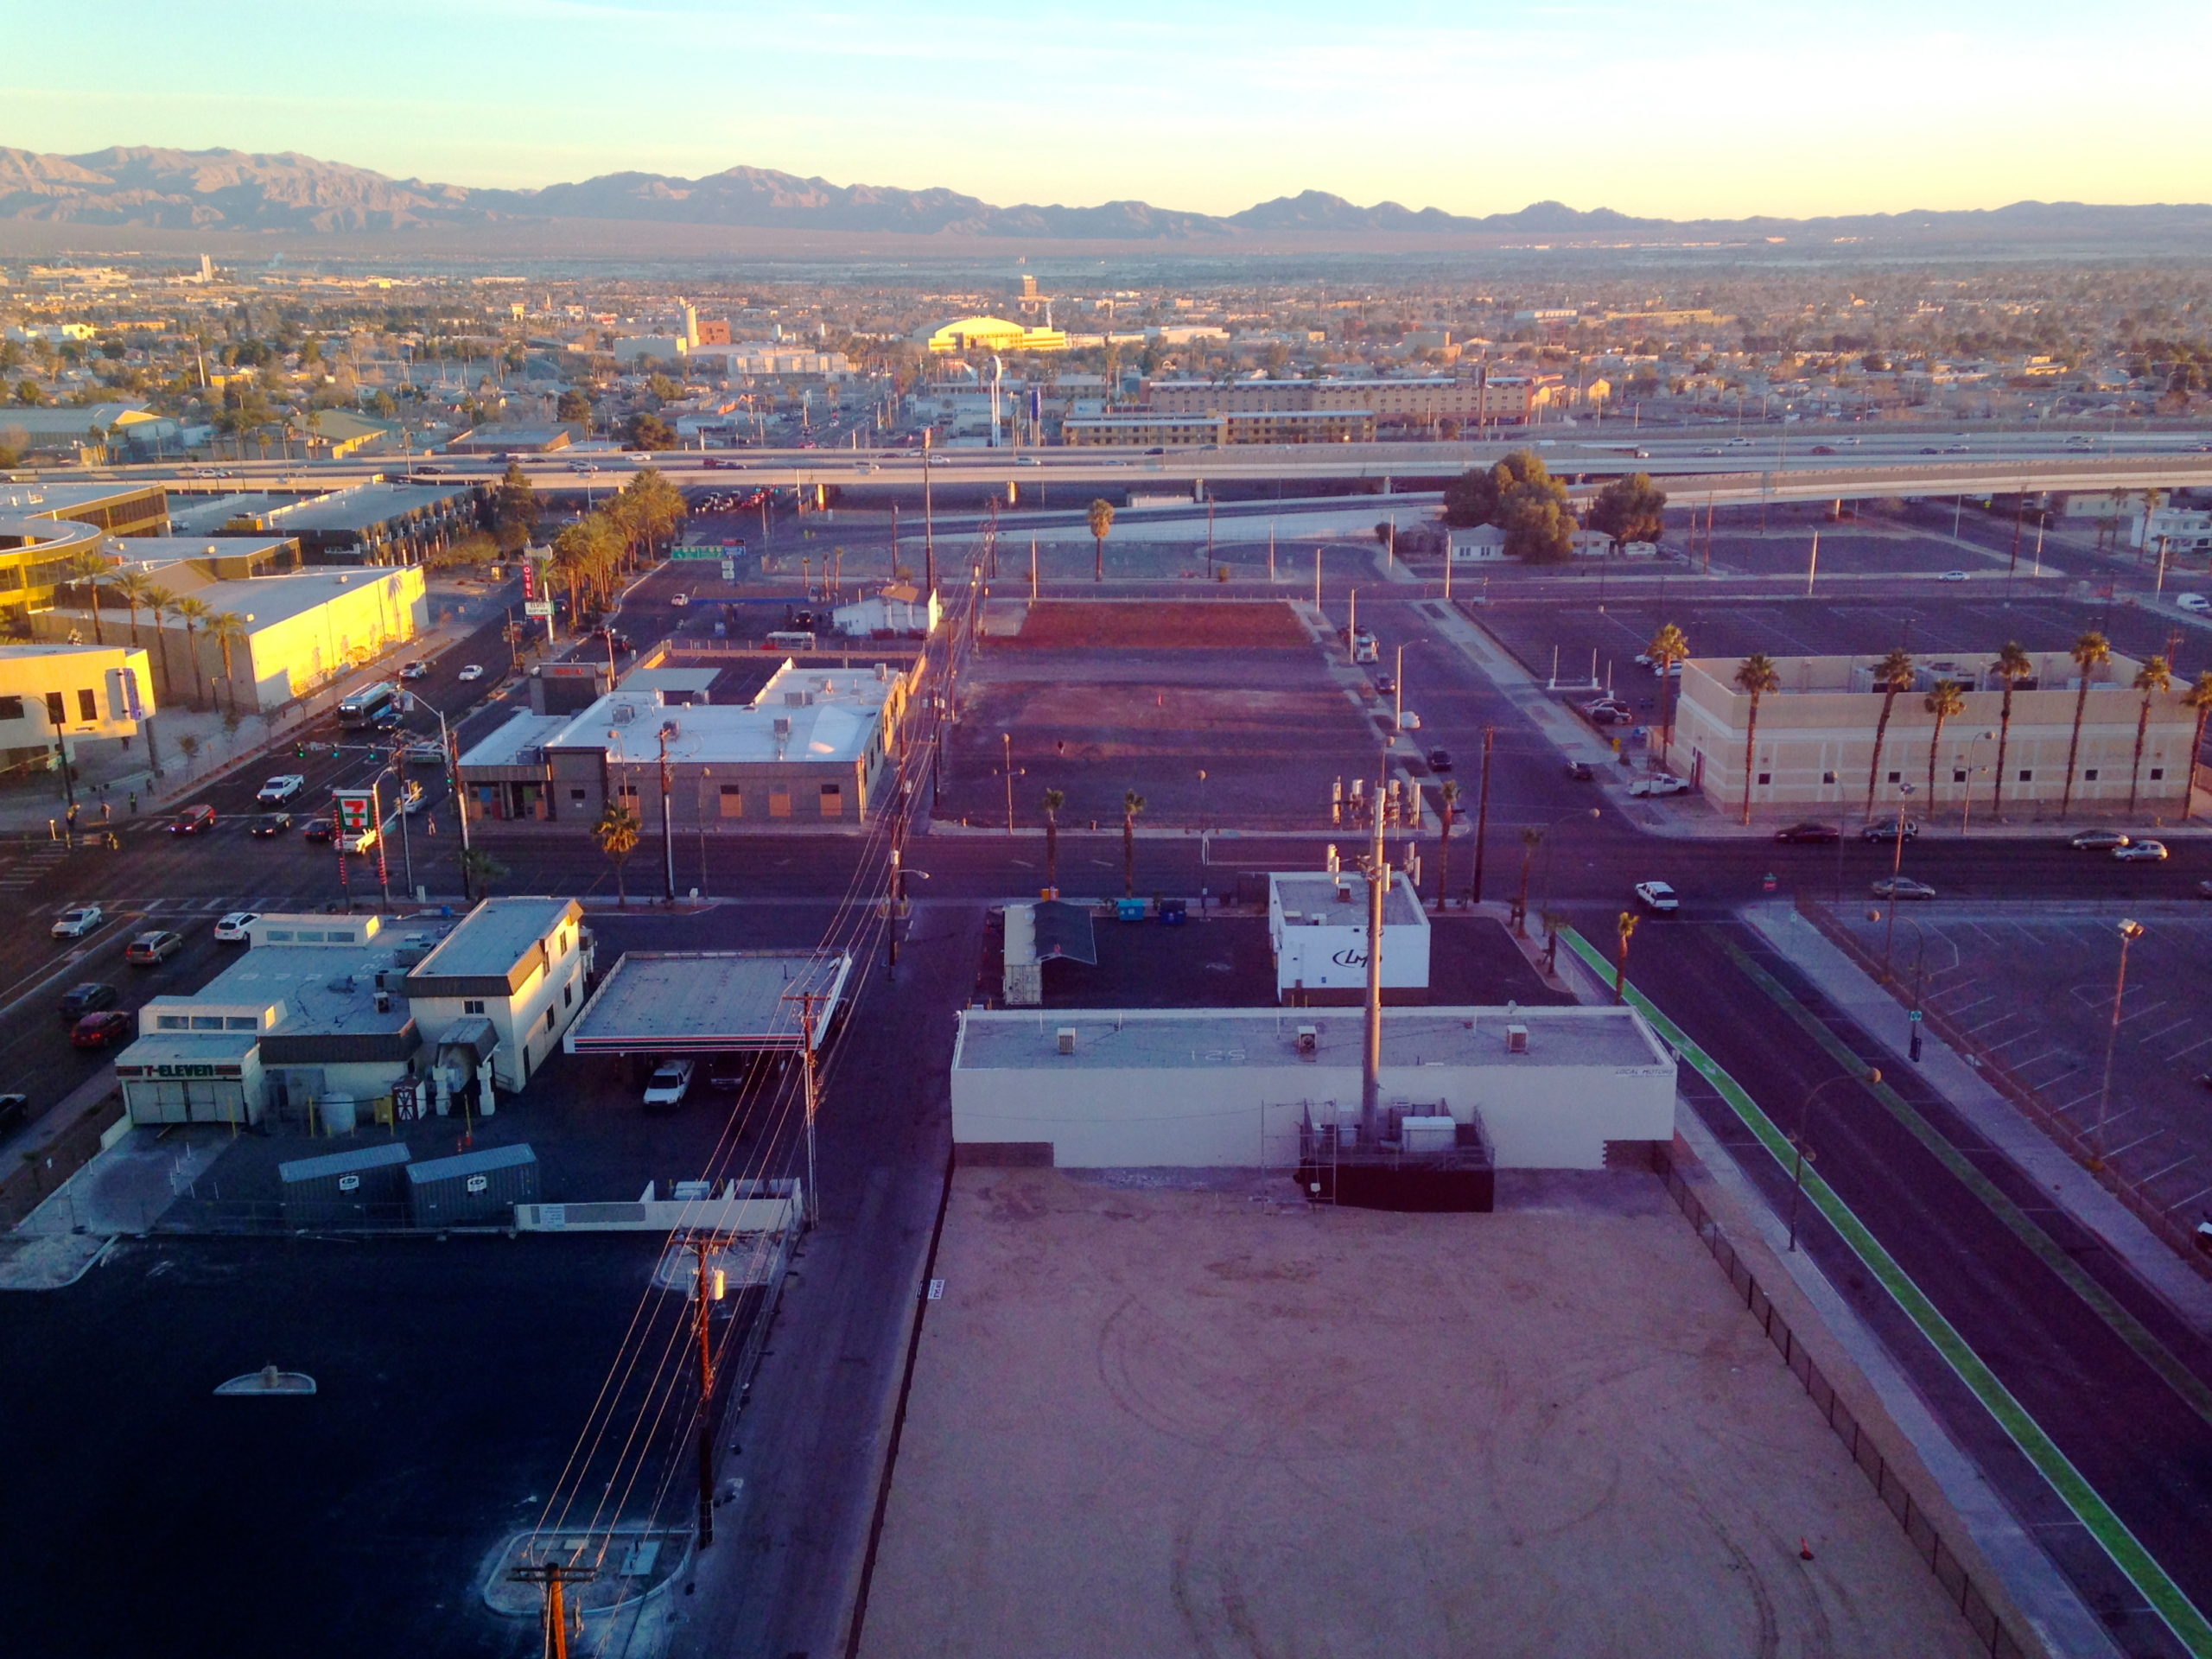 Exploring The Real Tech Story In Vegas: Zappos’ Downtown Project